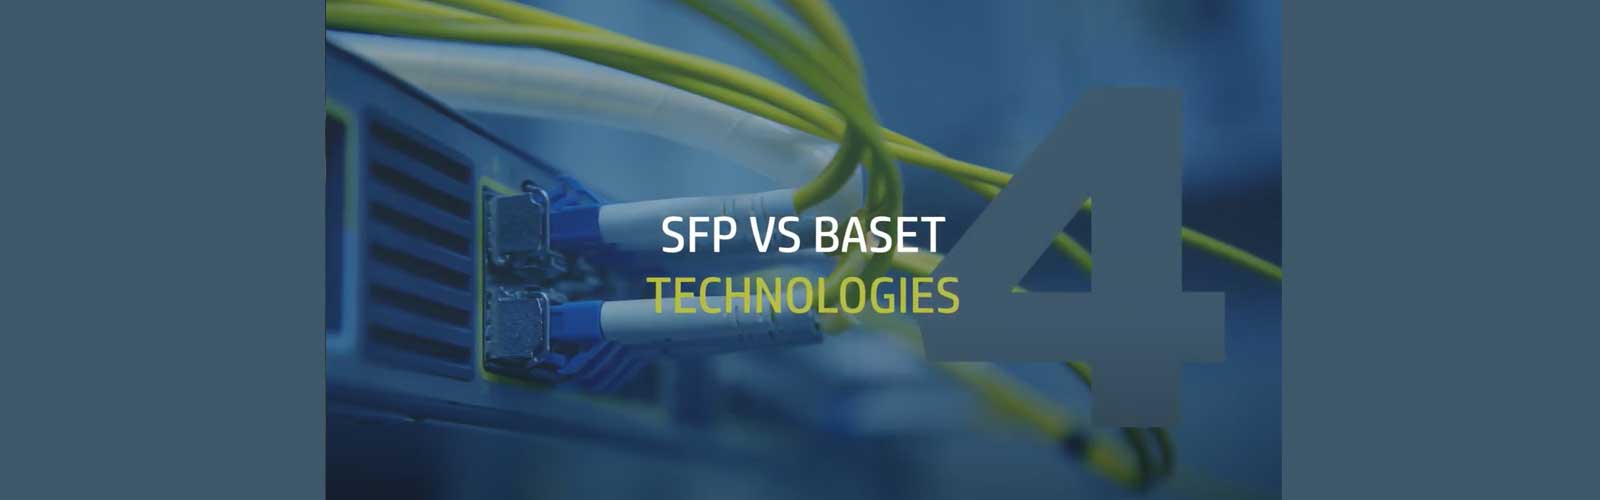 Comparing SFP technologies and BaseT technologies